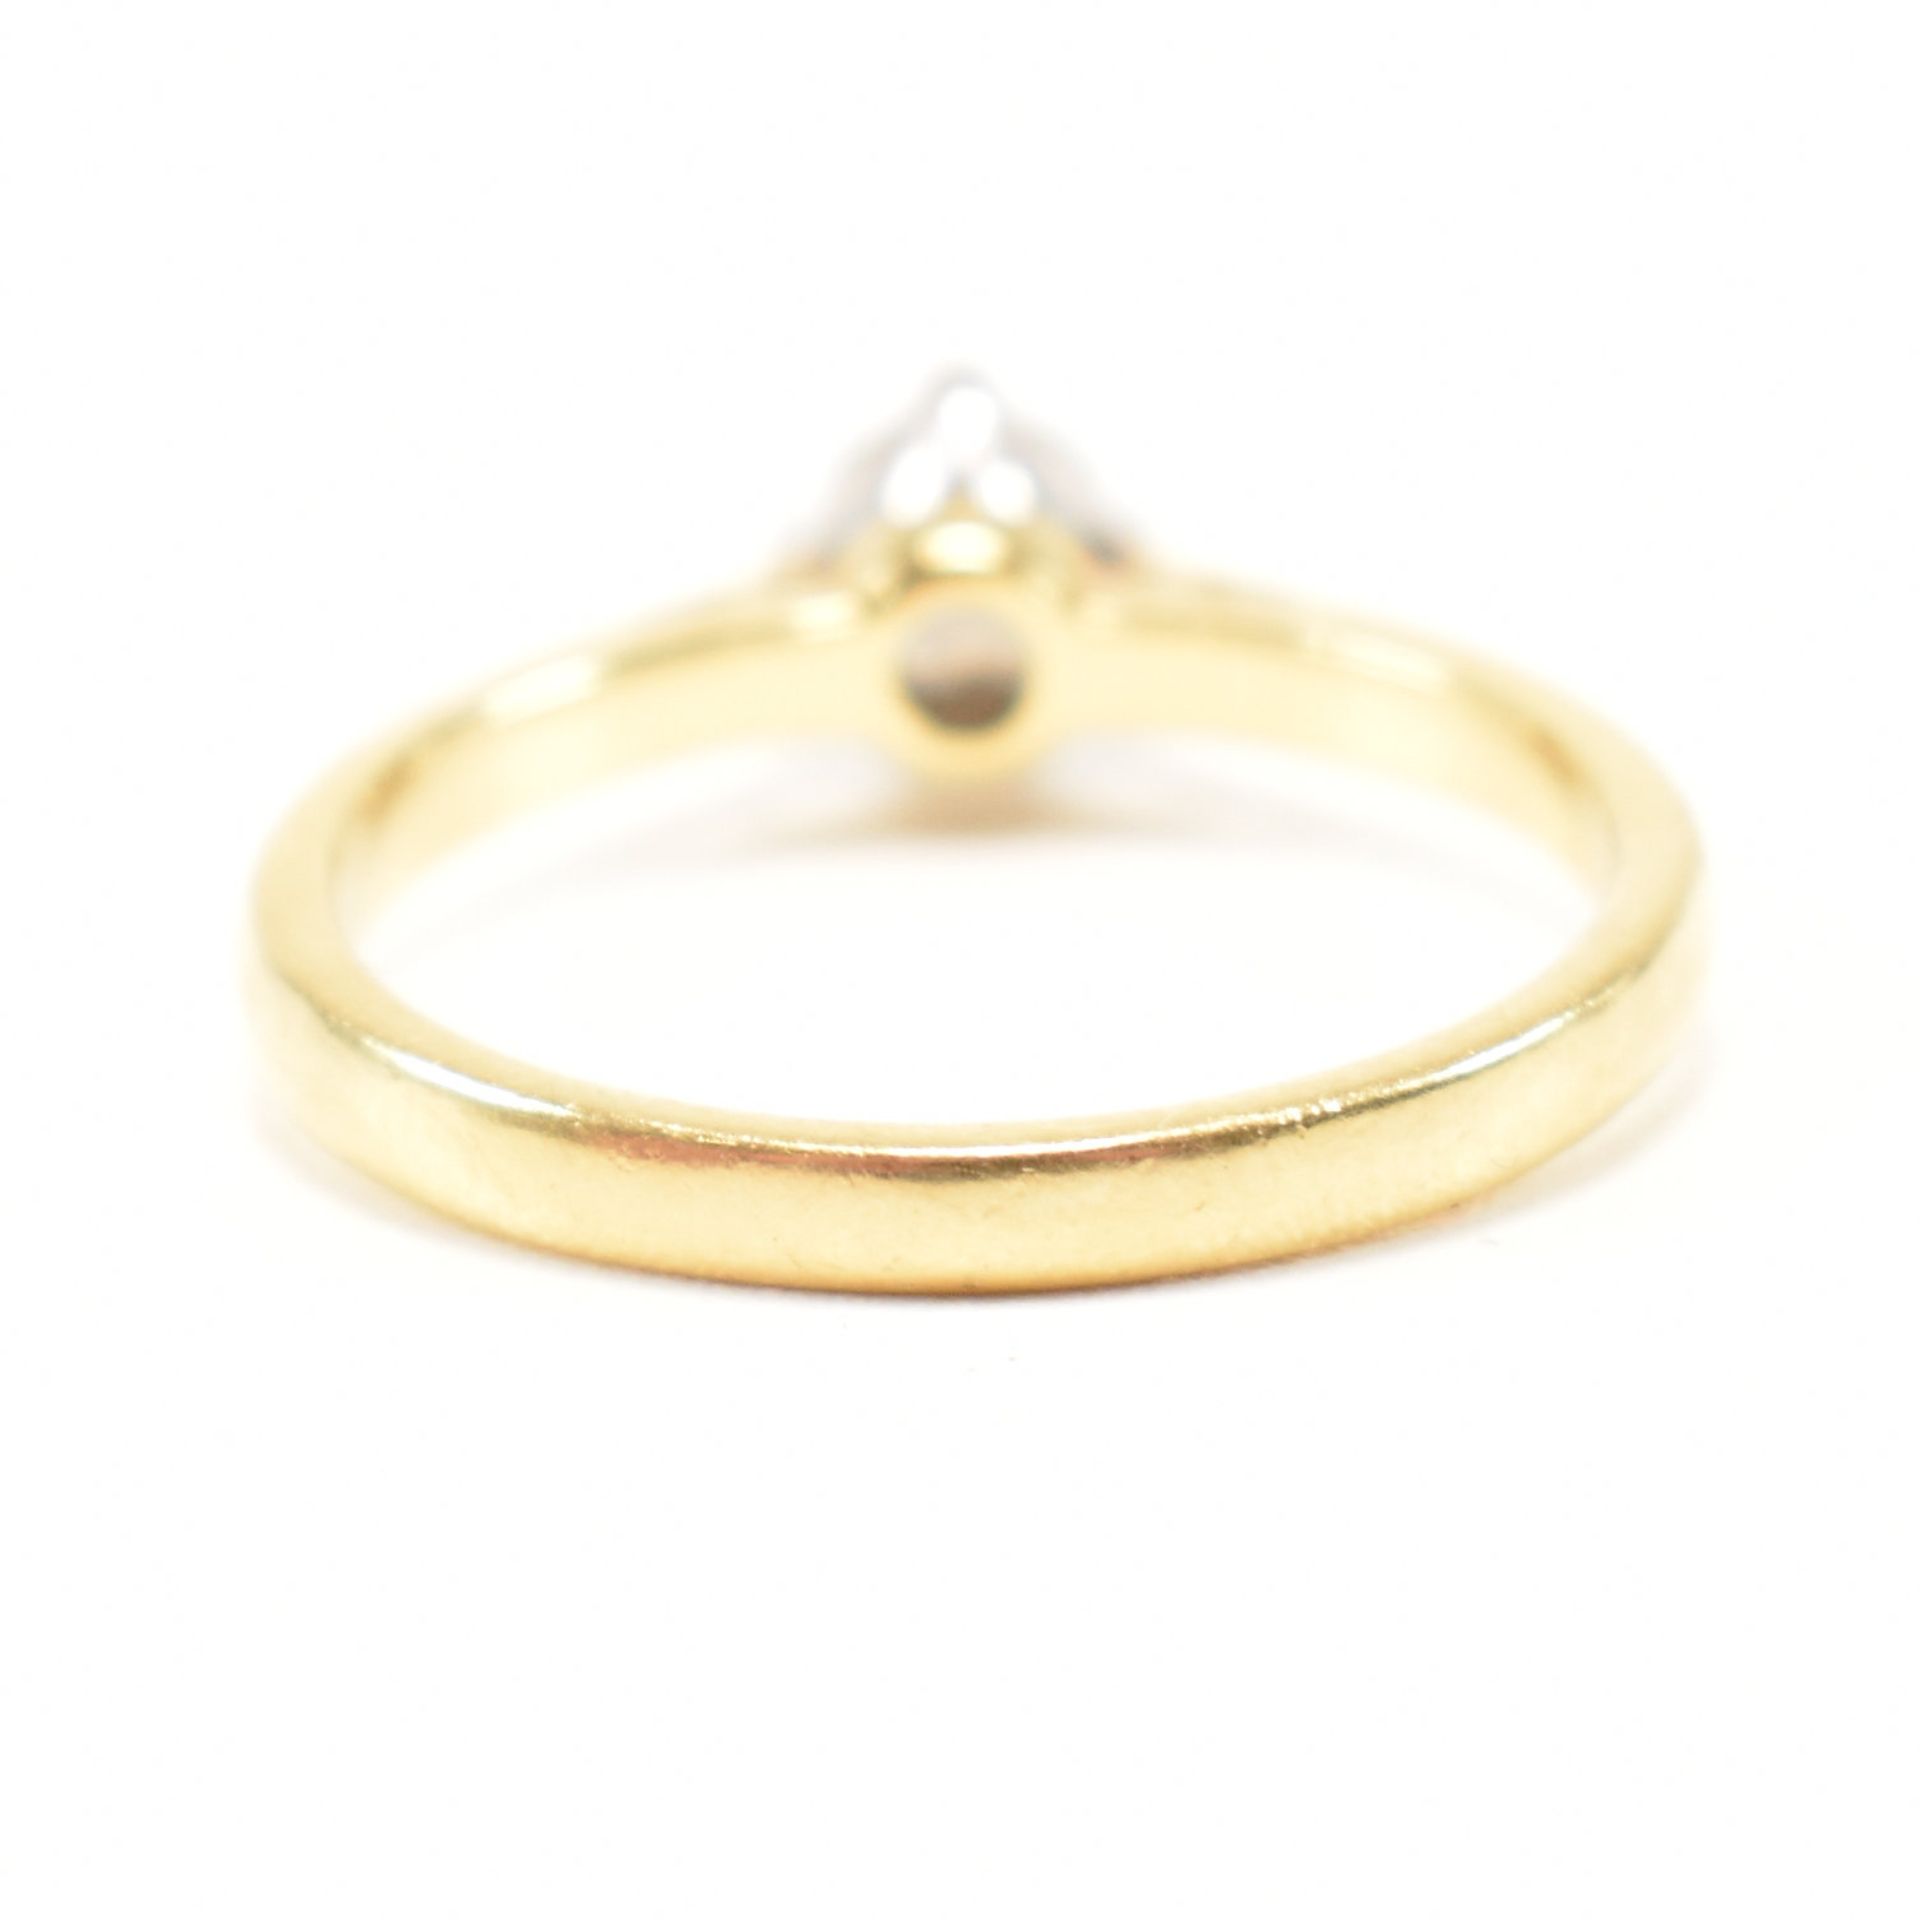 HALLMARKED 9CT GOLD & DIAMOND SOLITAIRE RING - Image 6 of 8